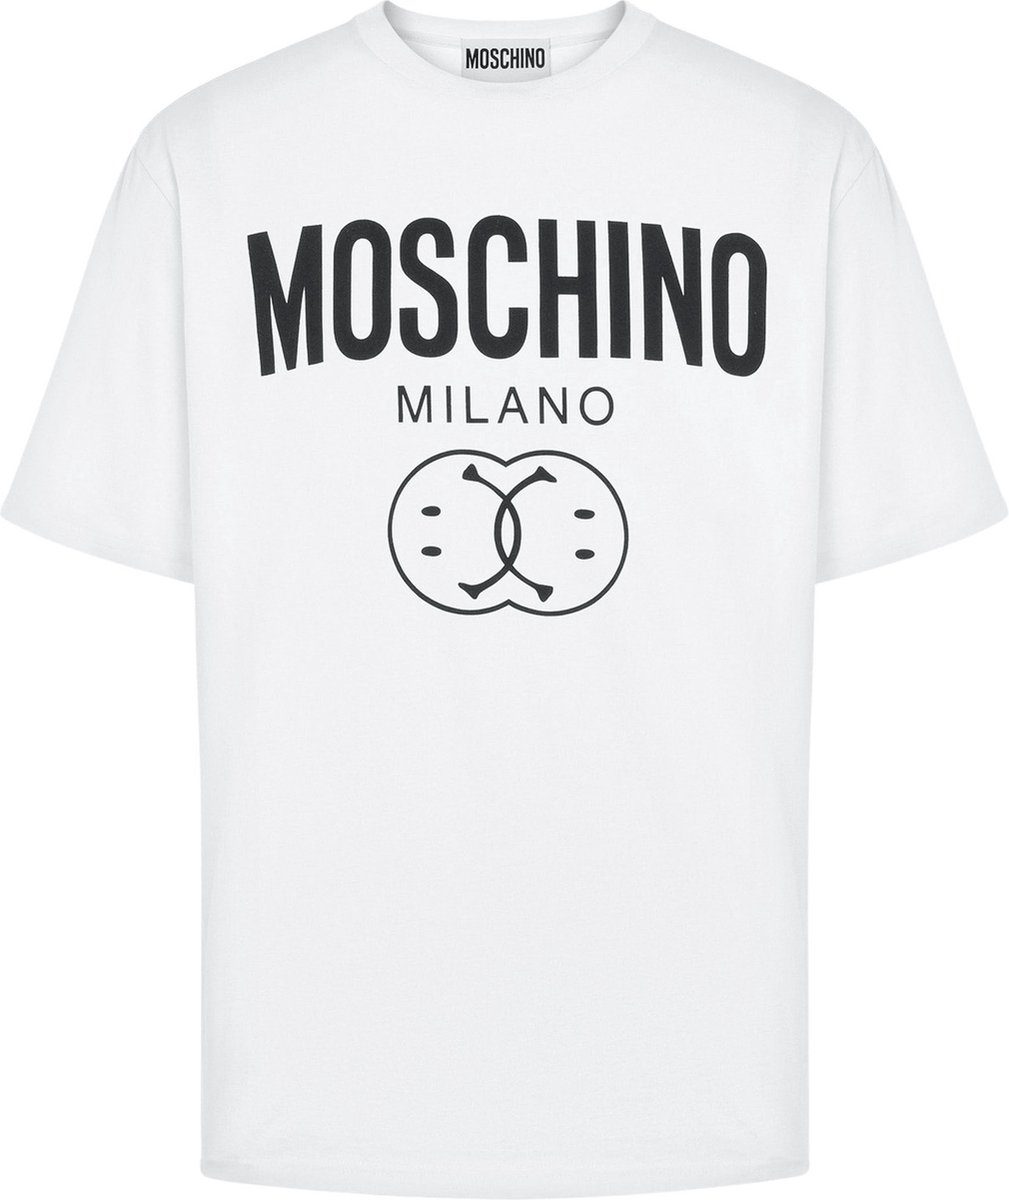 Moschino Heren Double Smiley Oversized T-Shirt Wit maat L